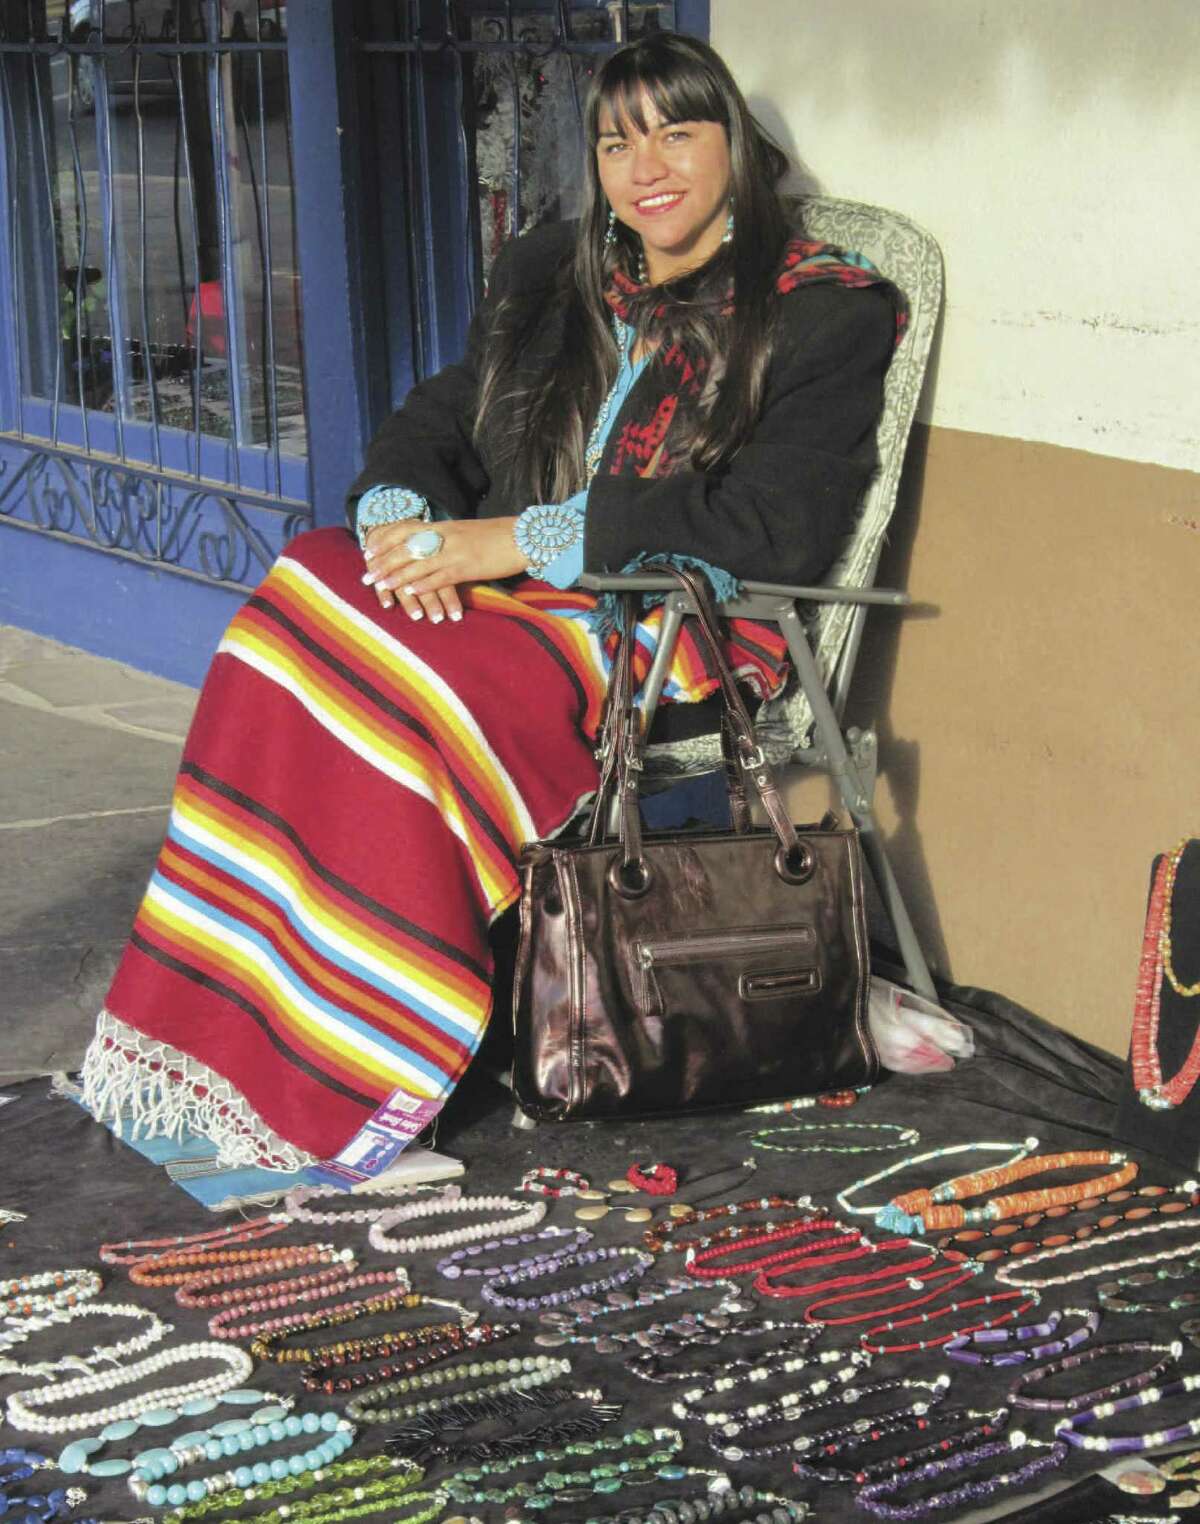 A vendor in Old Town Albuquerque displays her necklaces for sale.